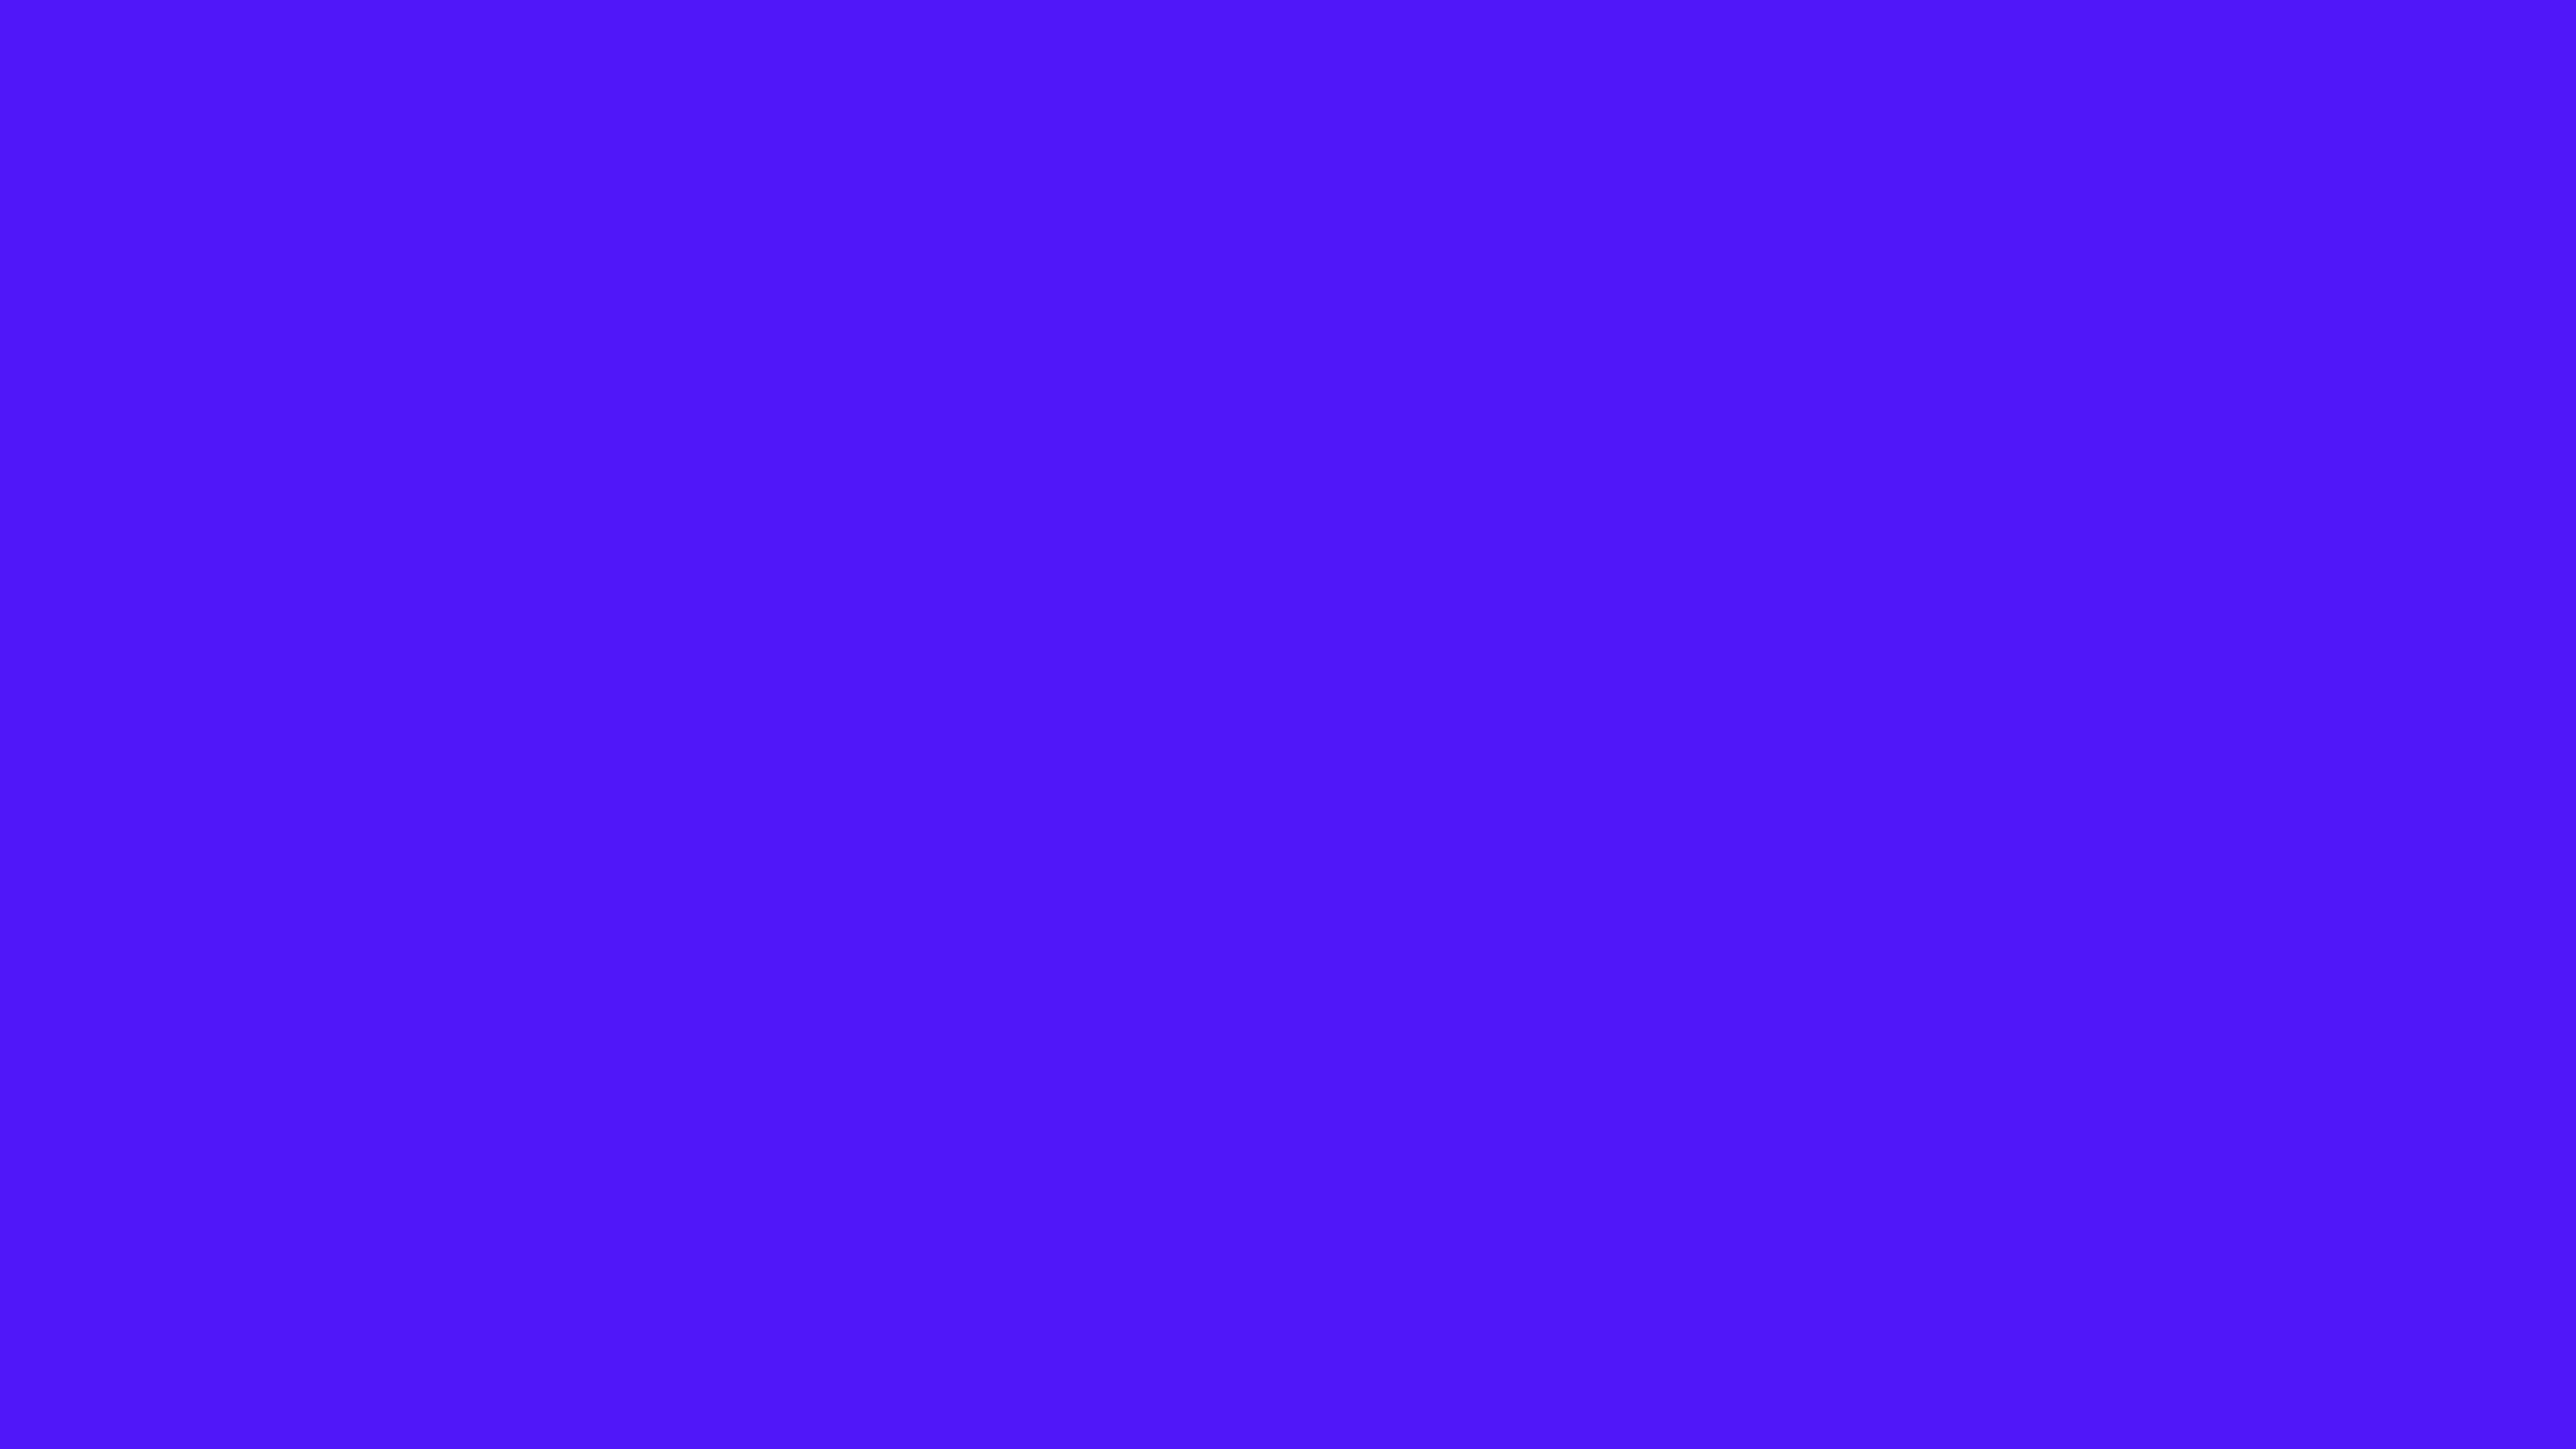 7680x4320 Han Purple Solid Color Background